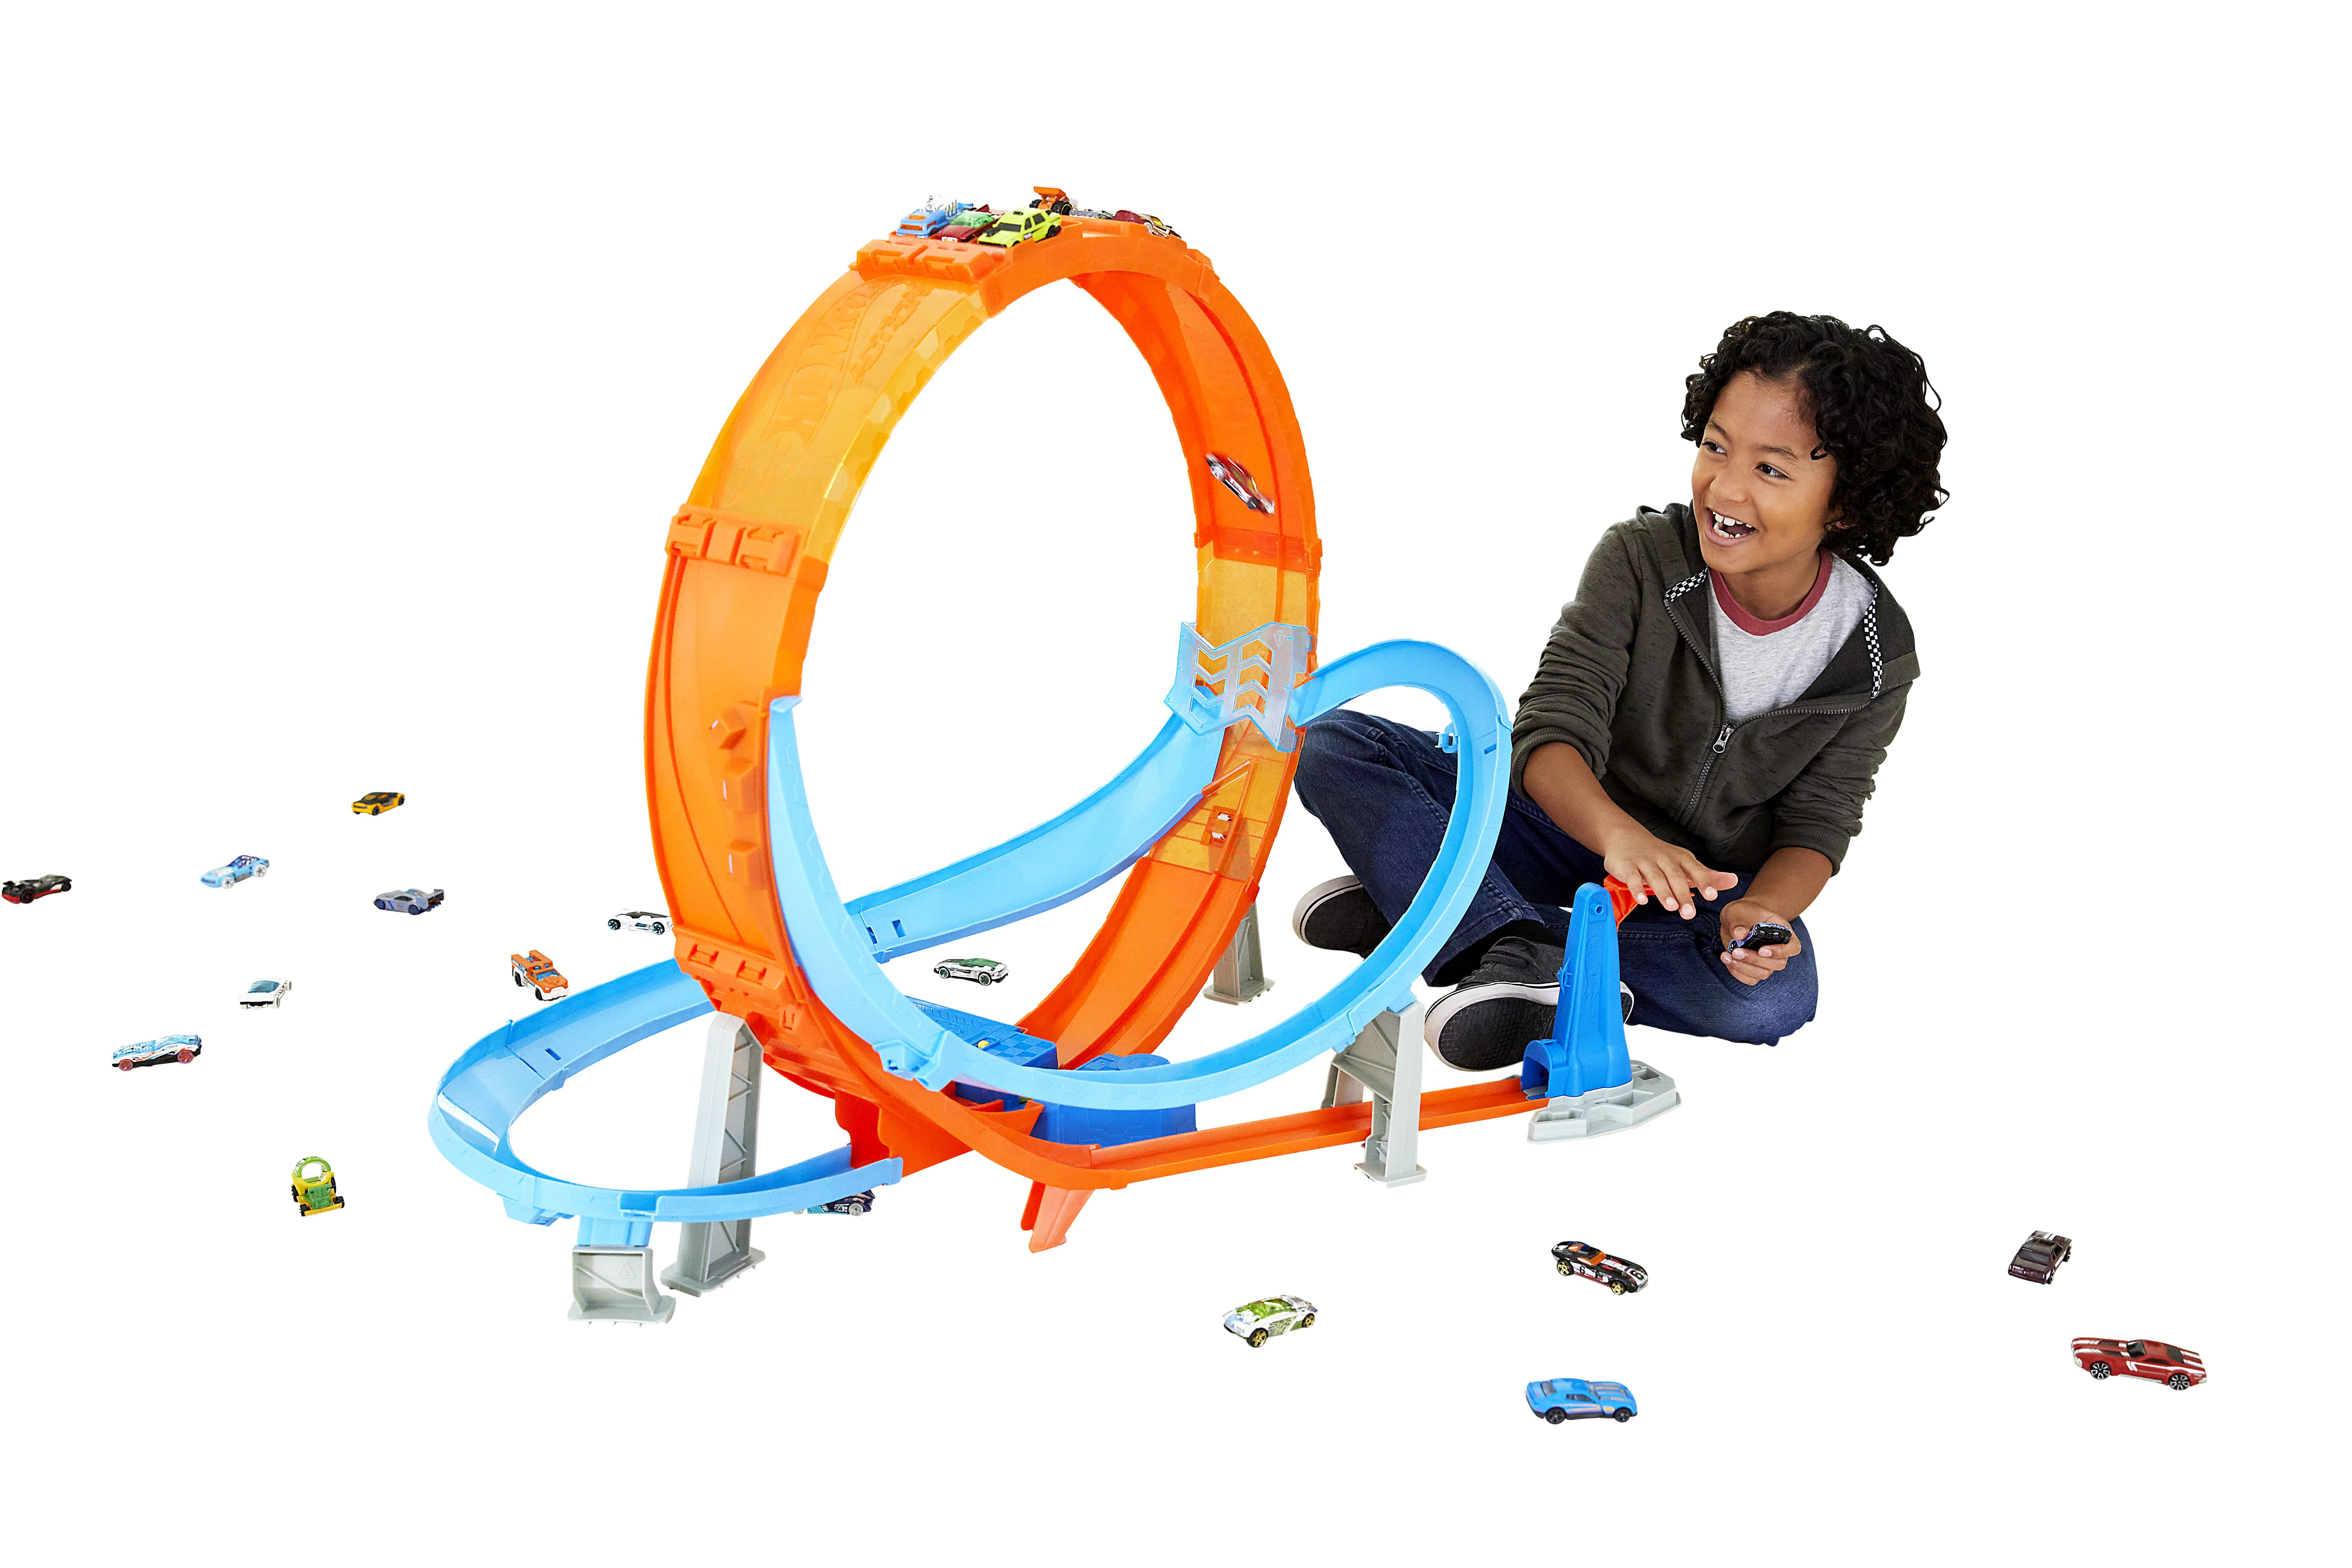 Hot Wheels Massive Loop Mayhem Track Set with Huge 28-Inch Wide Track Loop Slam Launcher Gift for Kids 5 Years Old & Up Designed for Multi-Car Play Battery Box & 1 Hot Wheels 1:64 Scale Car